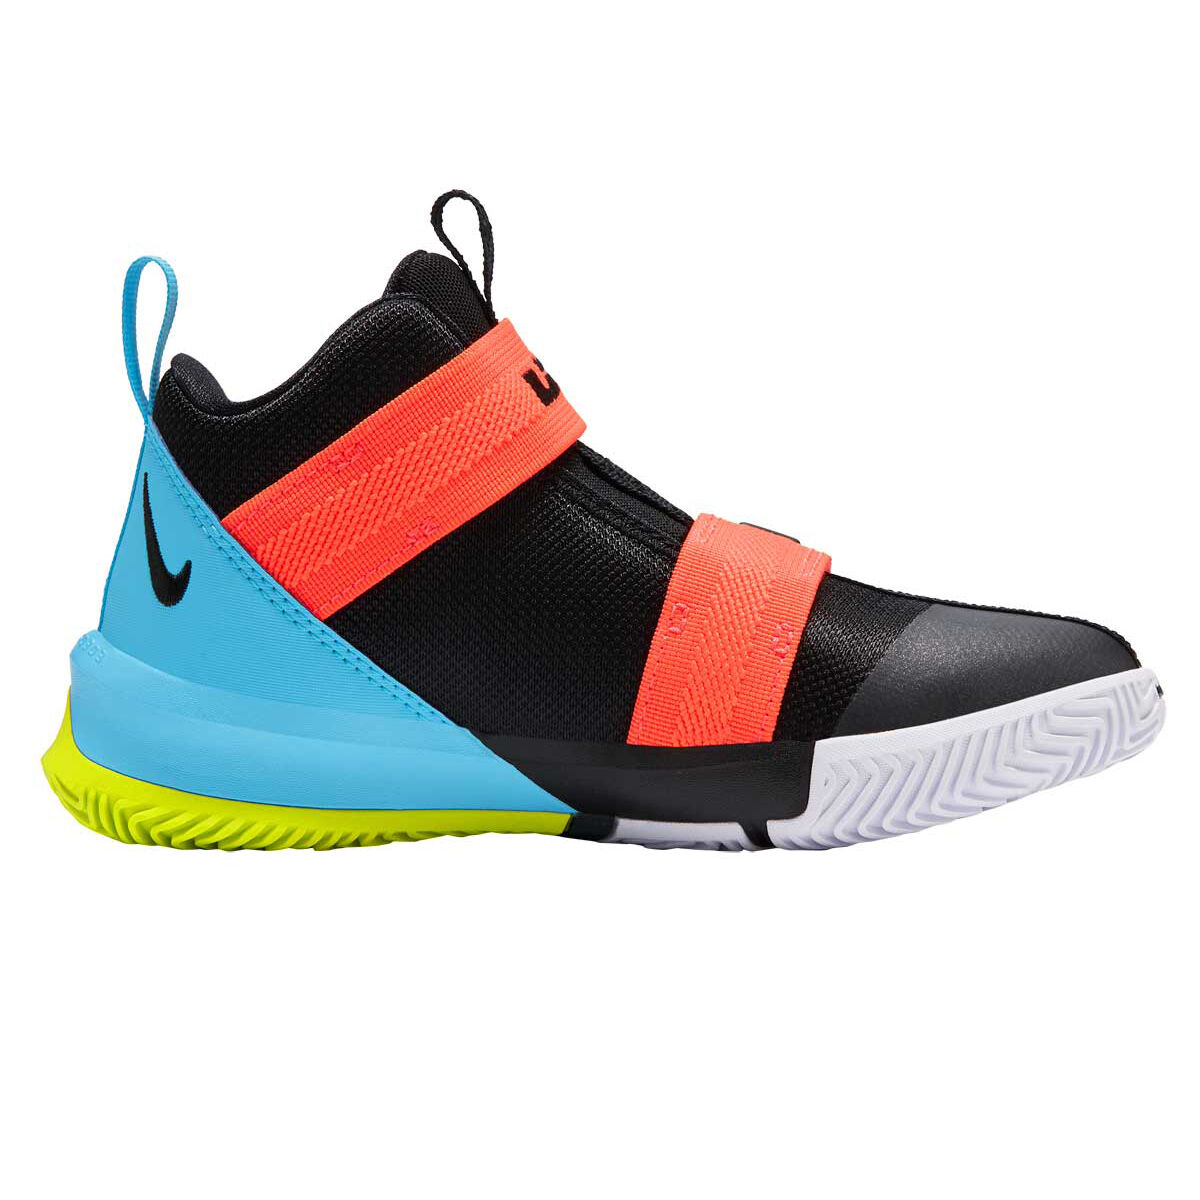 youth lebron soldier shoes